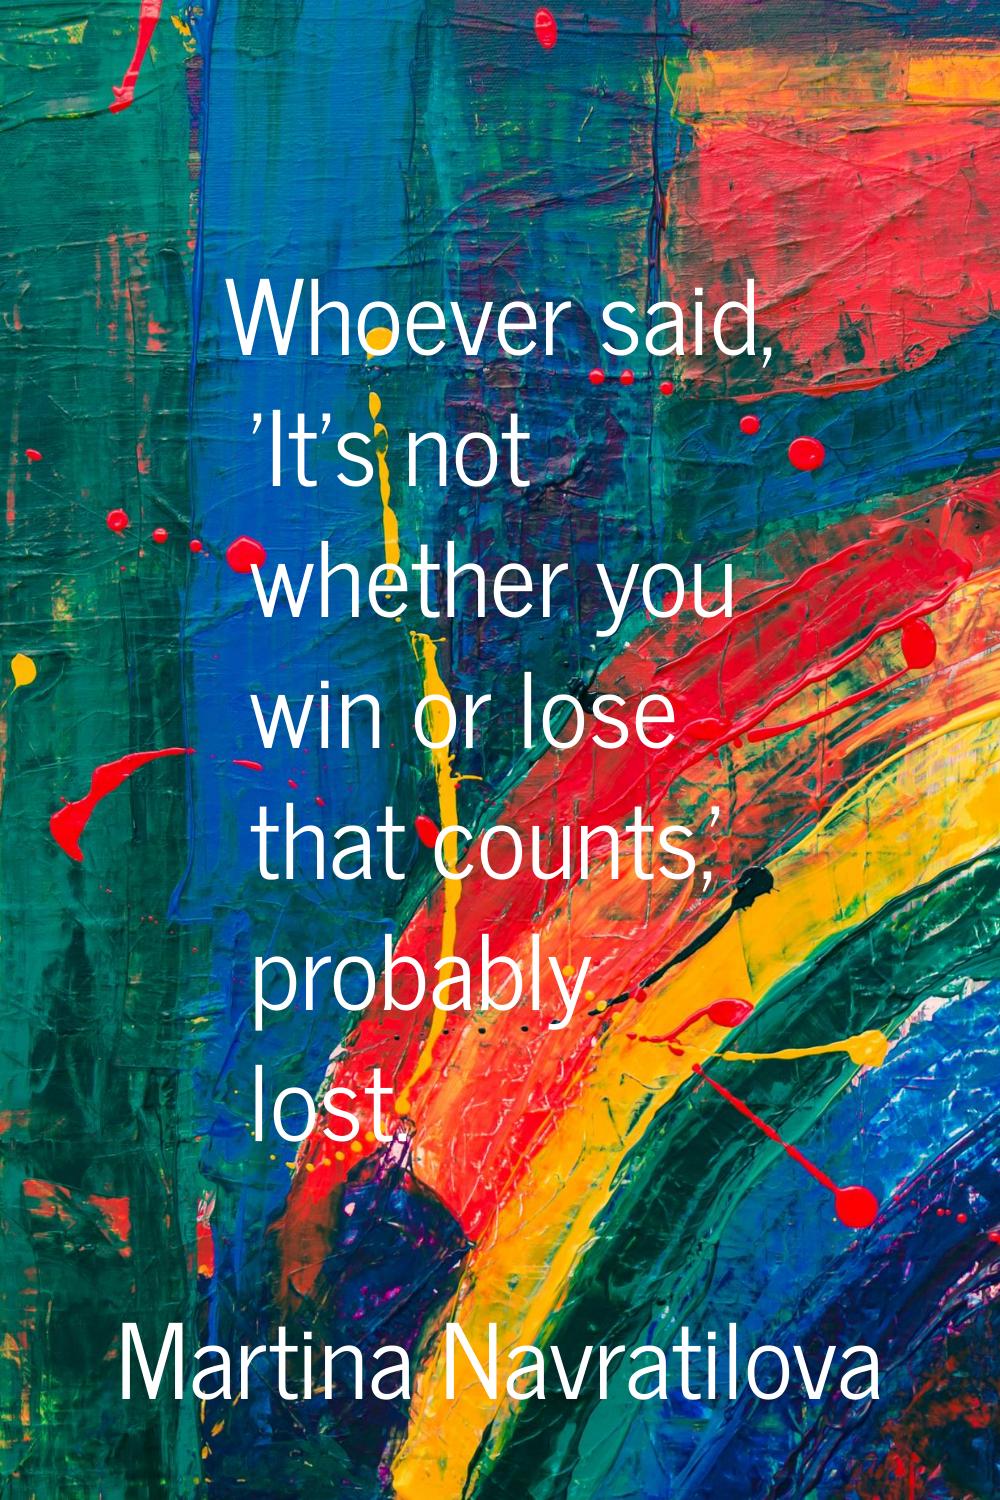 Whoever said, 'It's not whether you win or lose that counts,' probably lost.